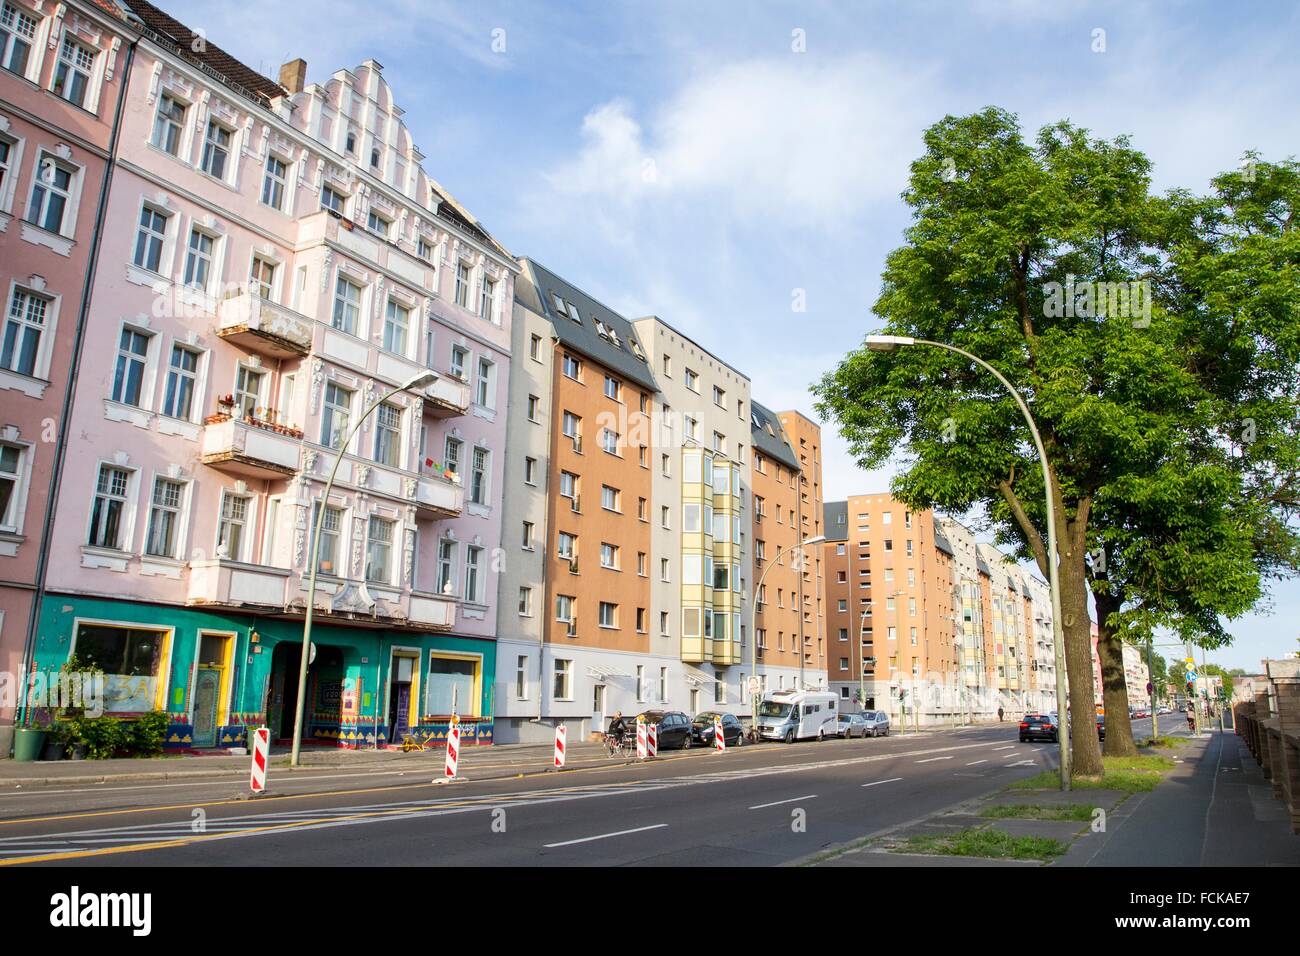 Stralauer Allee, Berlin, Germany Stock Photo